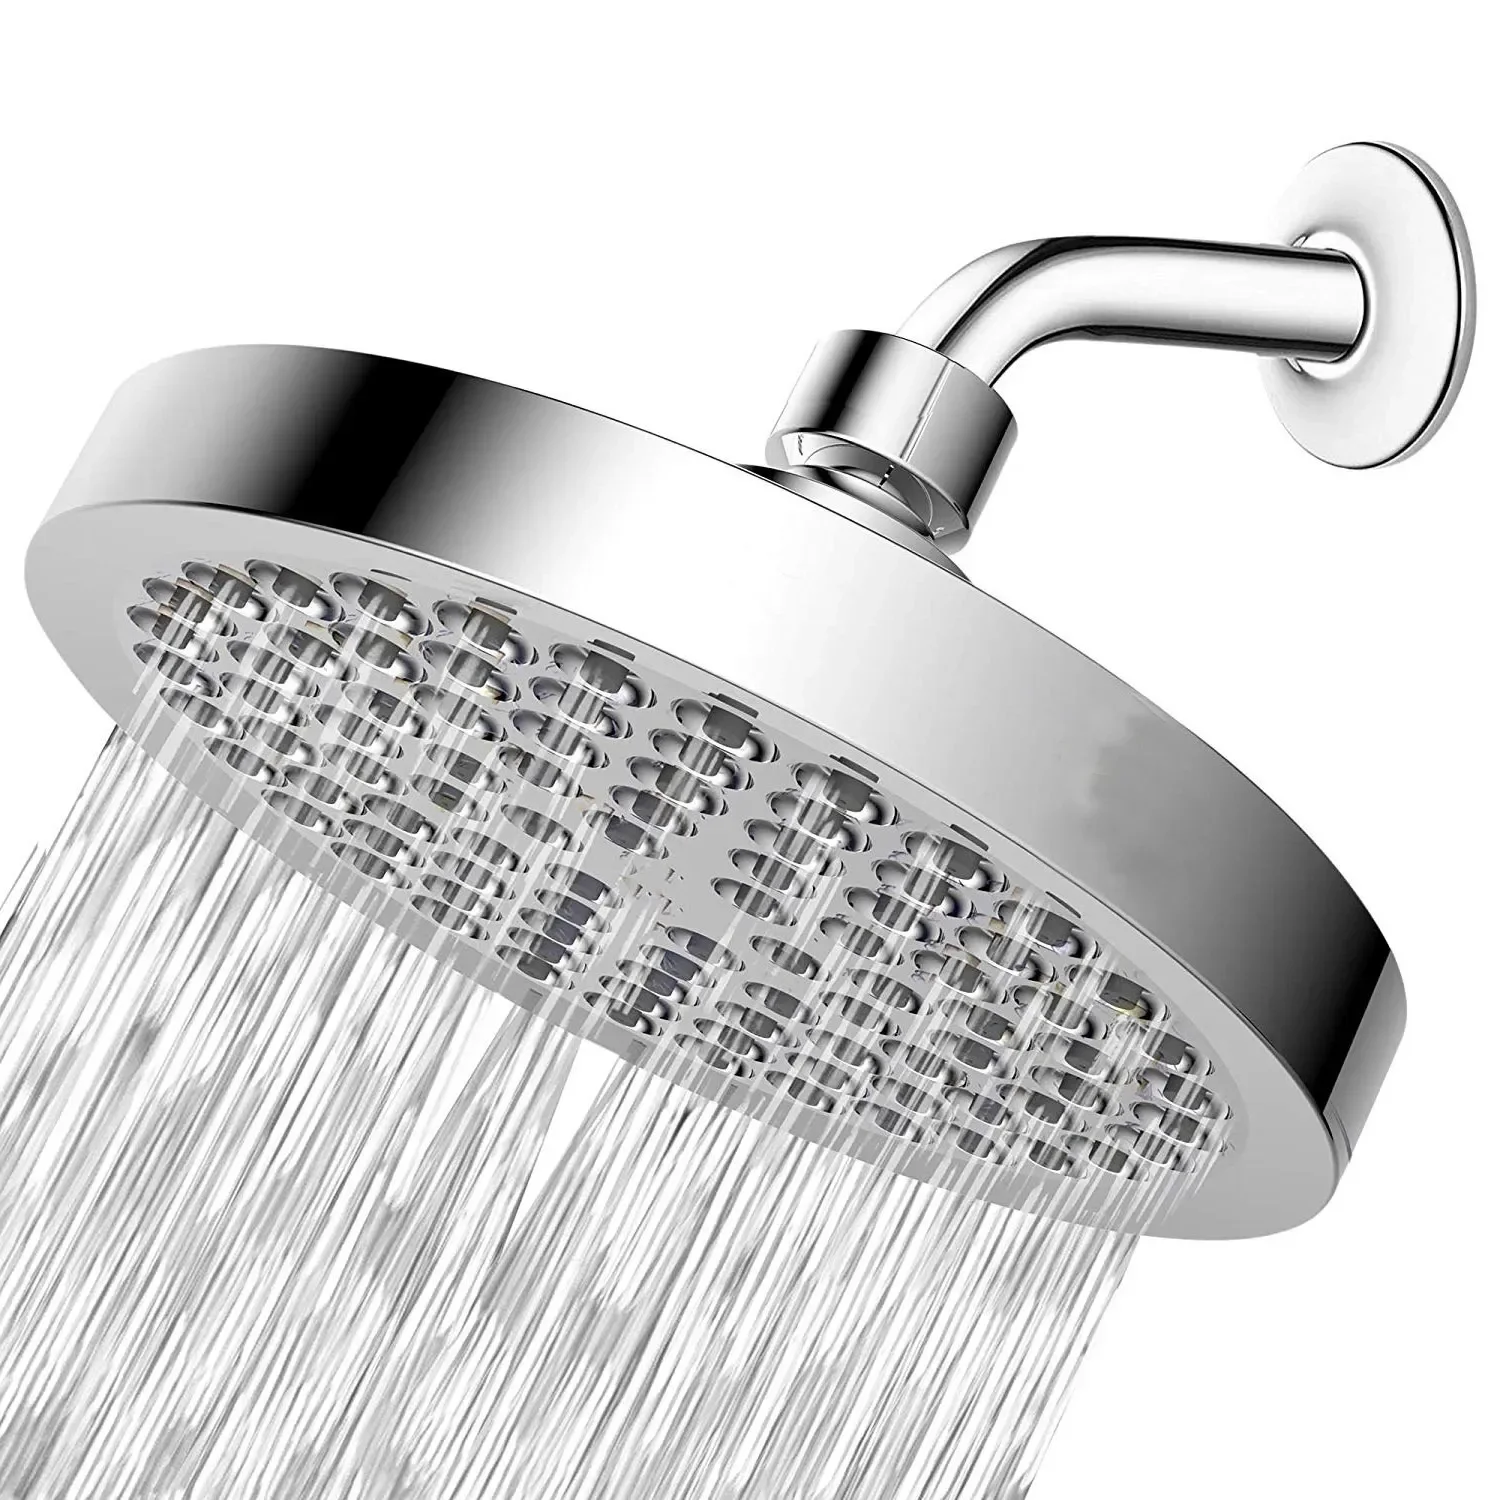 

6 Inch Shower Head Anti-Leak Anti-Clog Fixed Rain Showerhead Rainfall Spray Relaxation and Spa for High Water Pressure and Flow